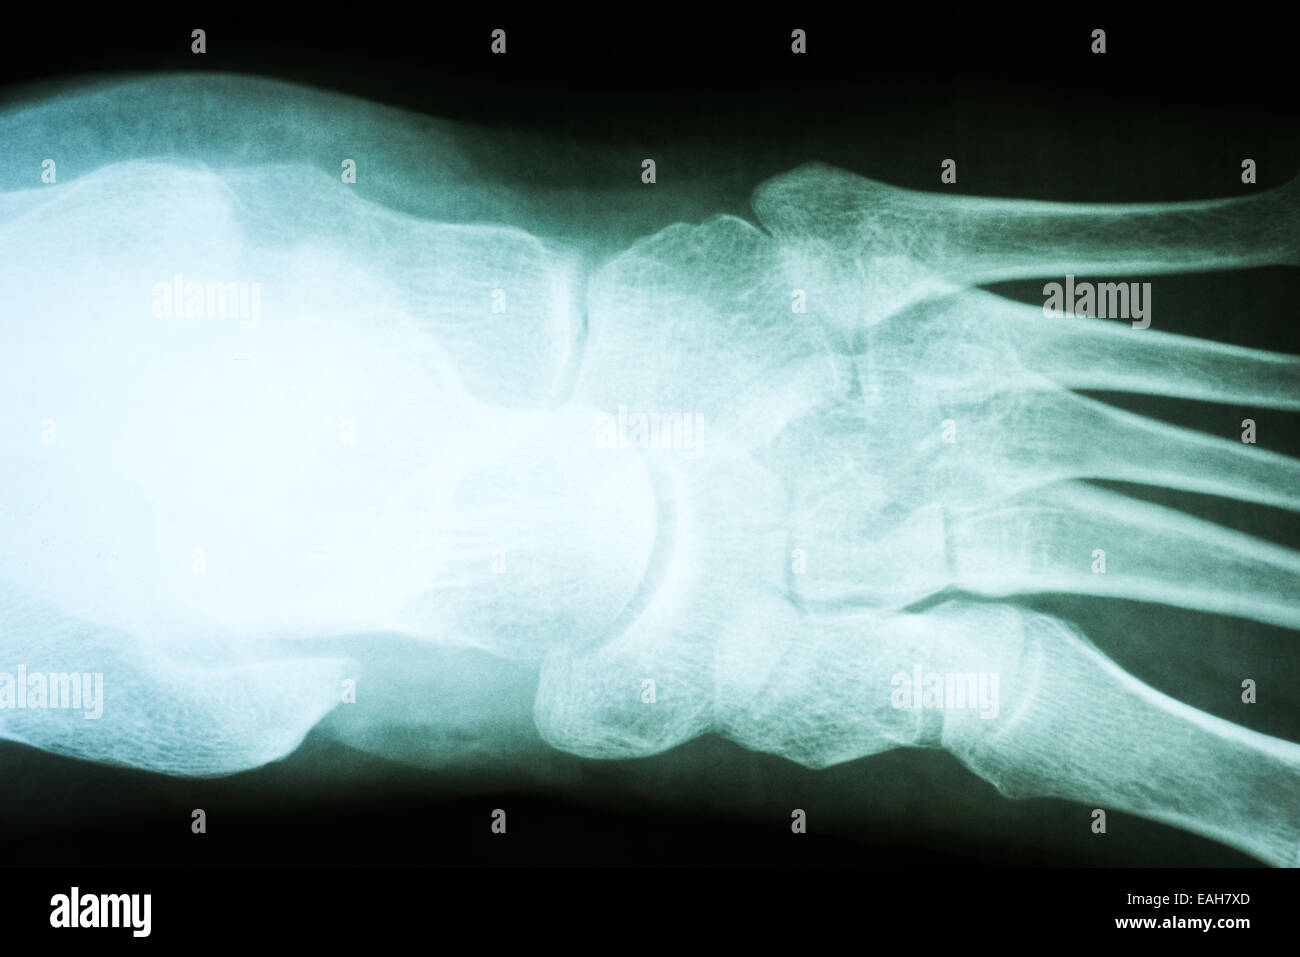 Human Foot X-Ray On Black Background Stock Photo